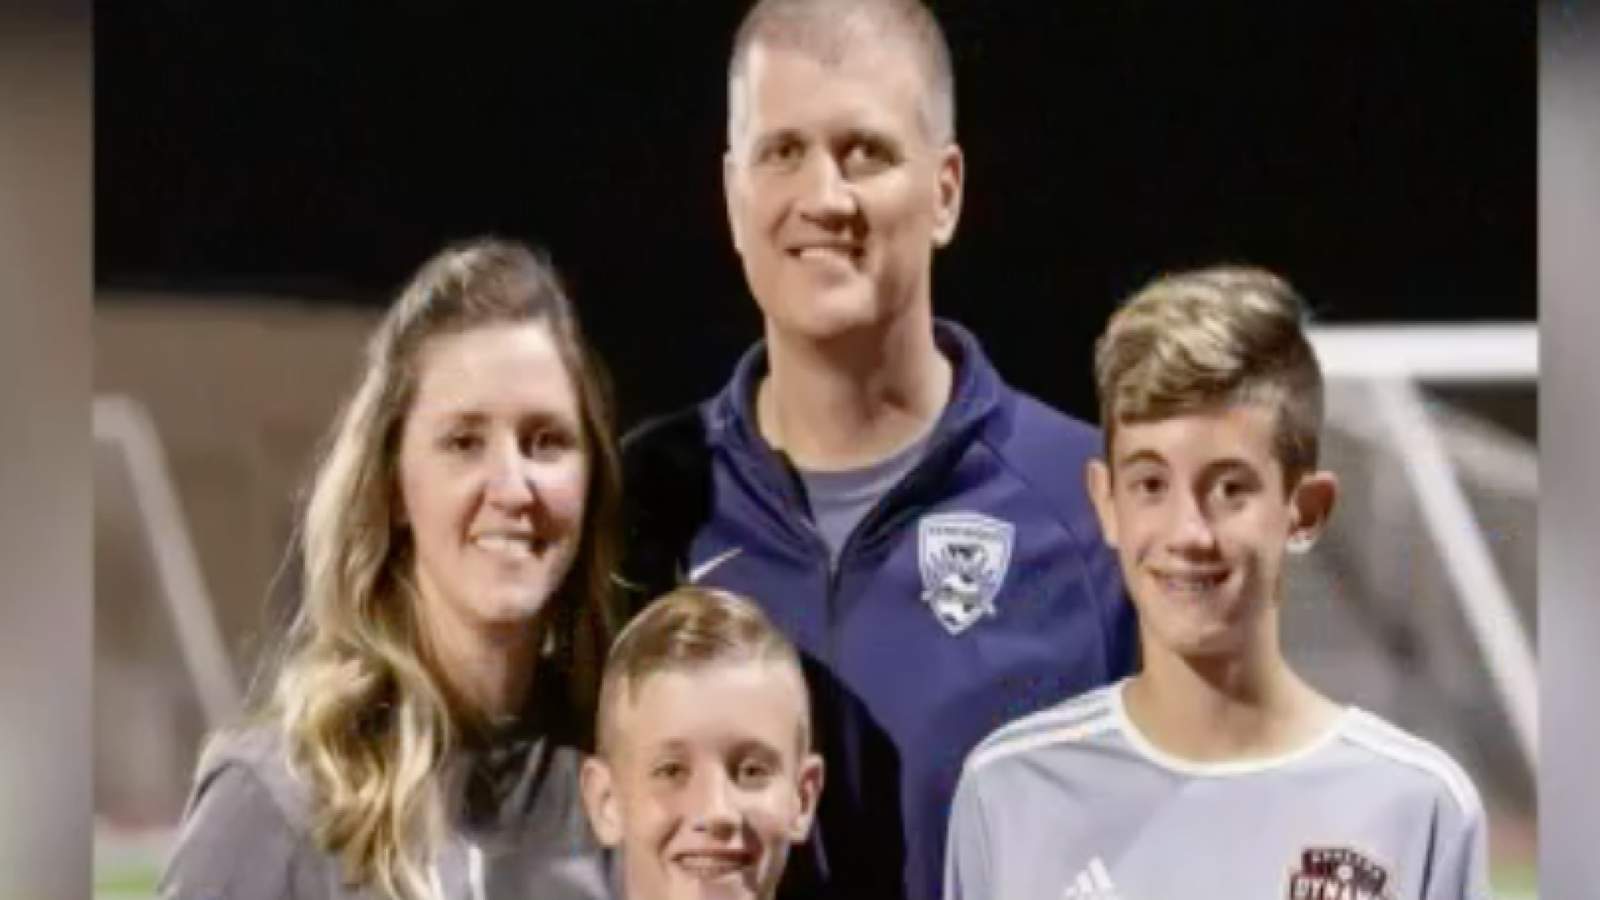 Kingwood HS coach recovering from cancer surgery alone due to COVID-19 hospital restrictions